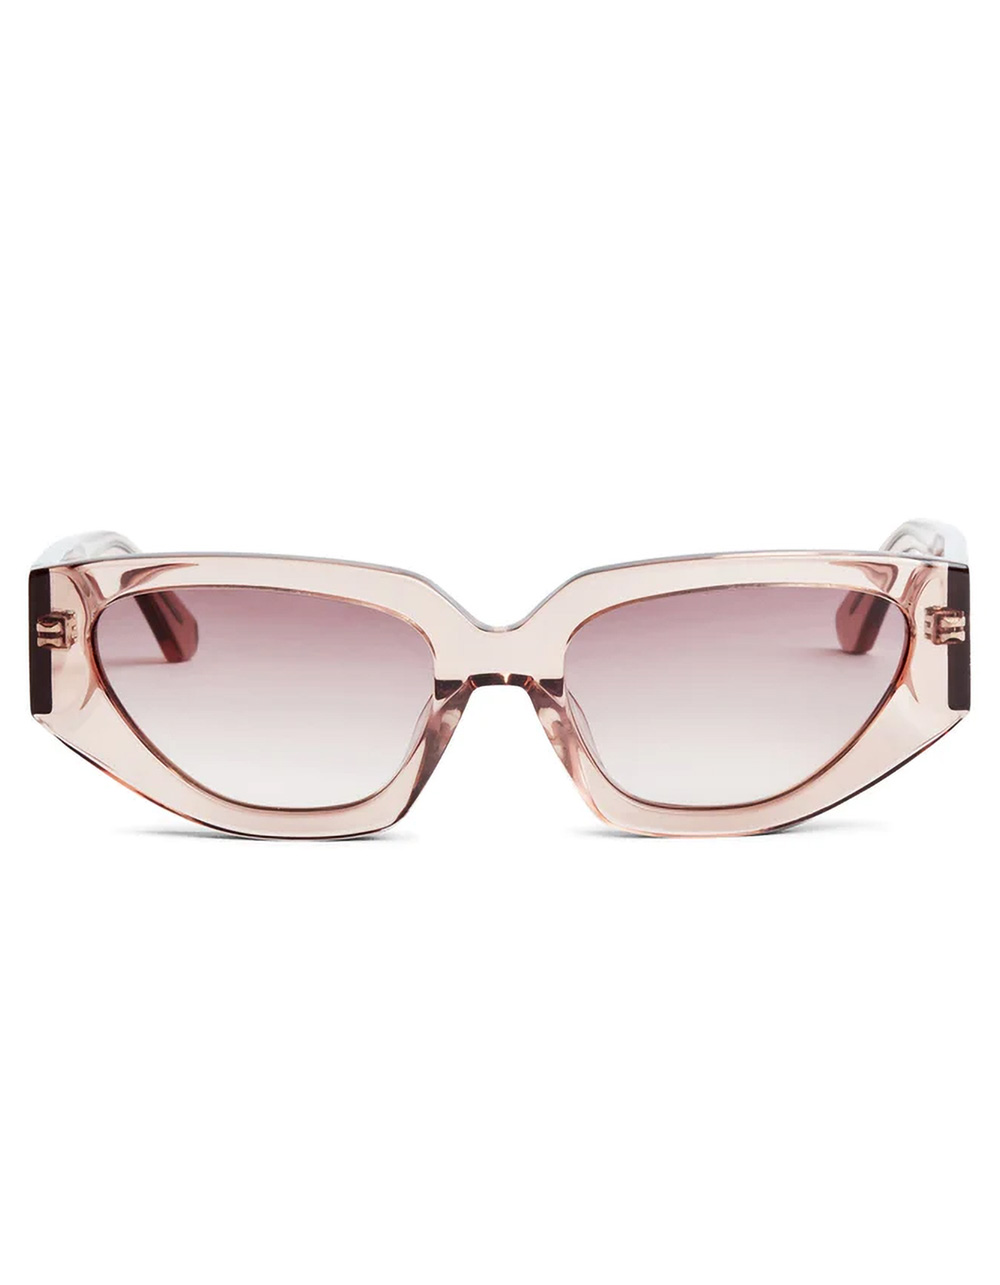 SITO Axis Sunglasses - ROSE | Tillys